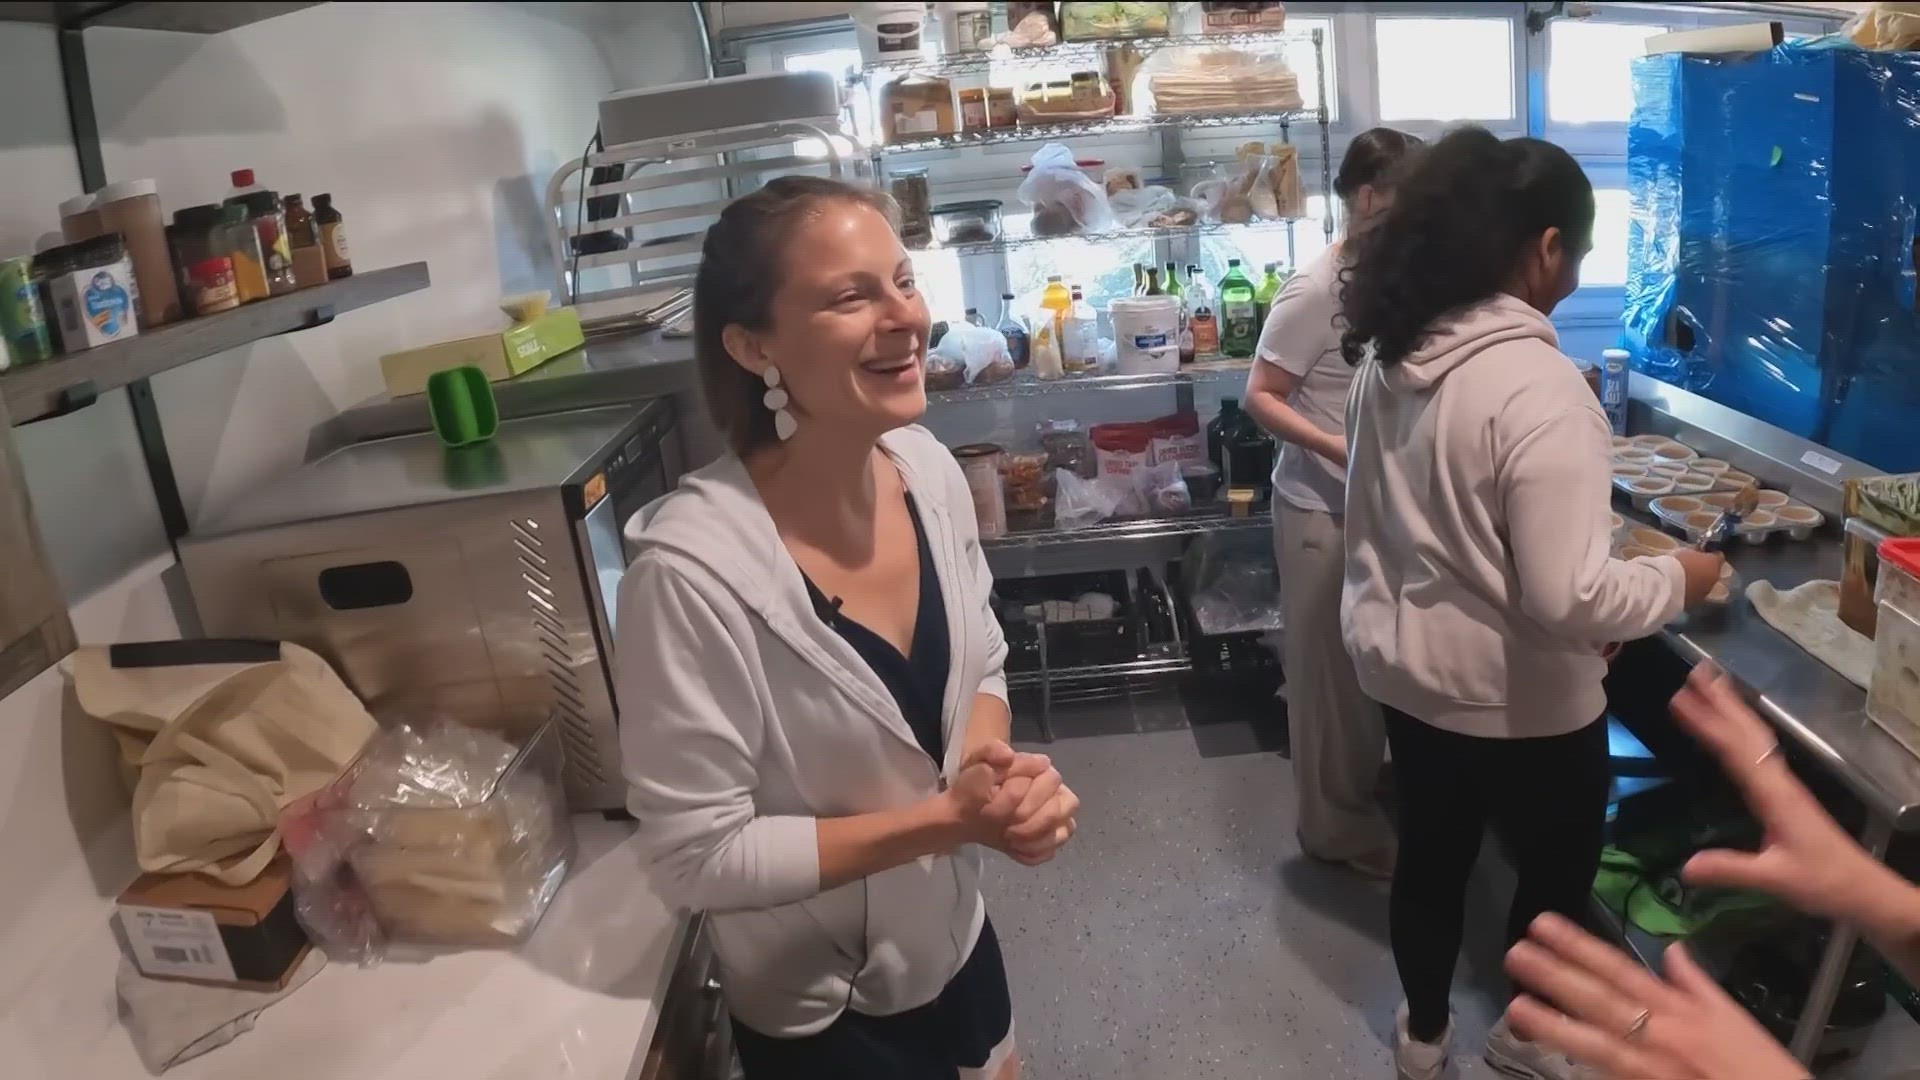 The non-profit Sunday Lunchbox is solving food waste in Austin by using donations to serve free meals to underprivileged families.